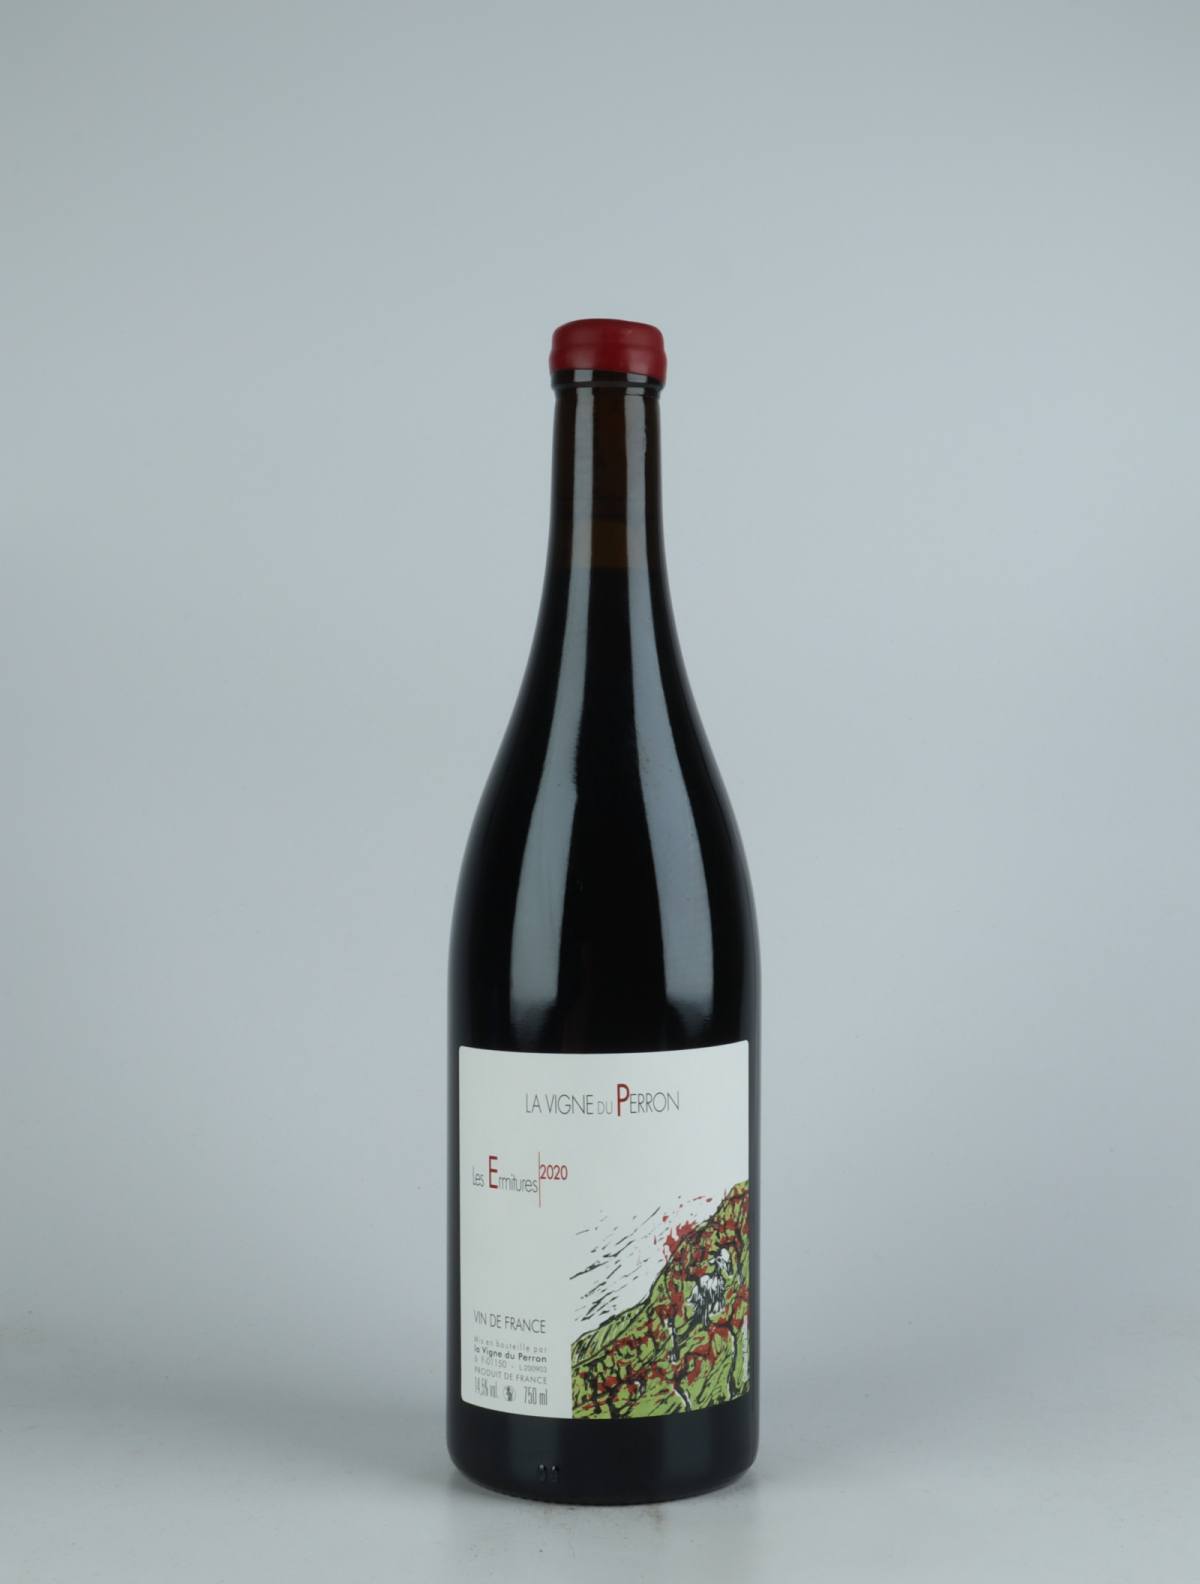 A bottle 2020 Ermitures Red wine from Domaine du Perron, Bugey in France